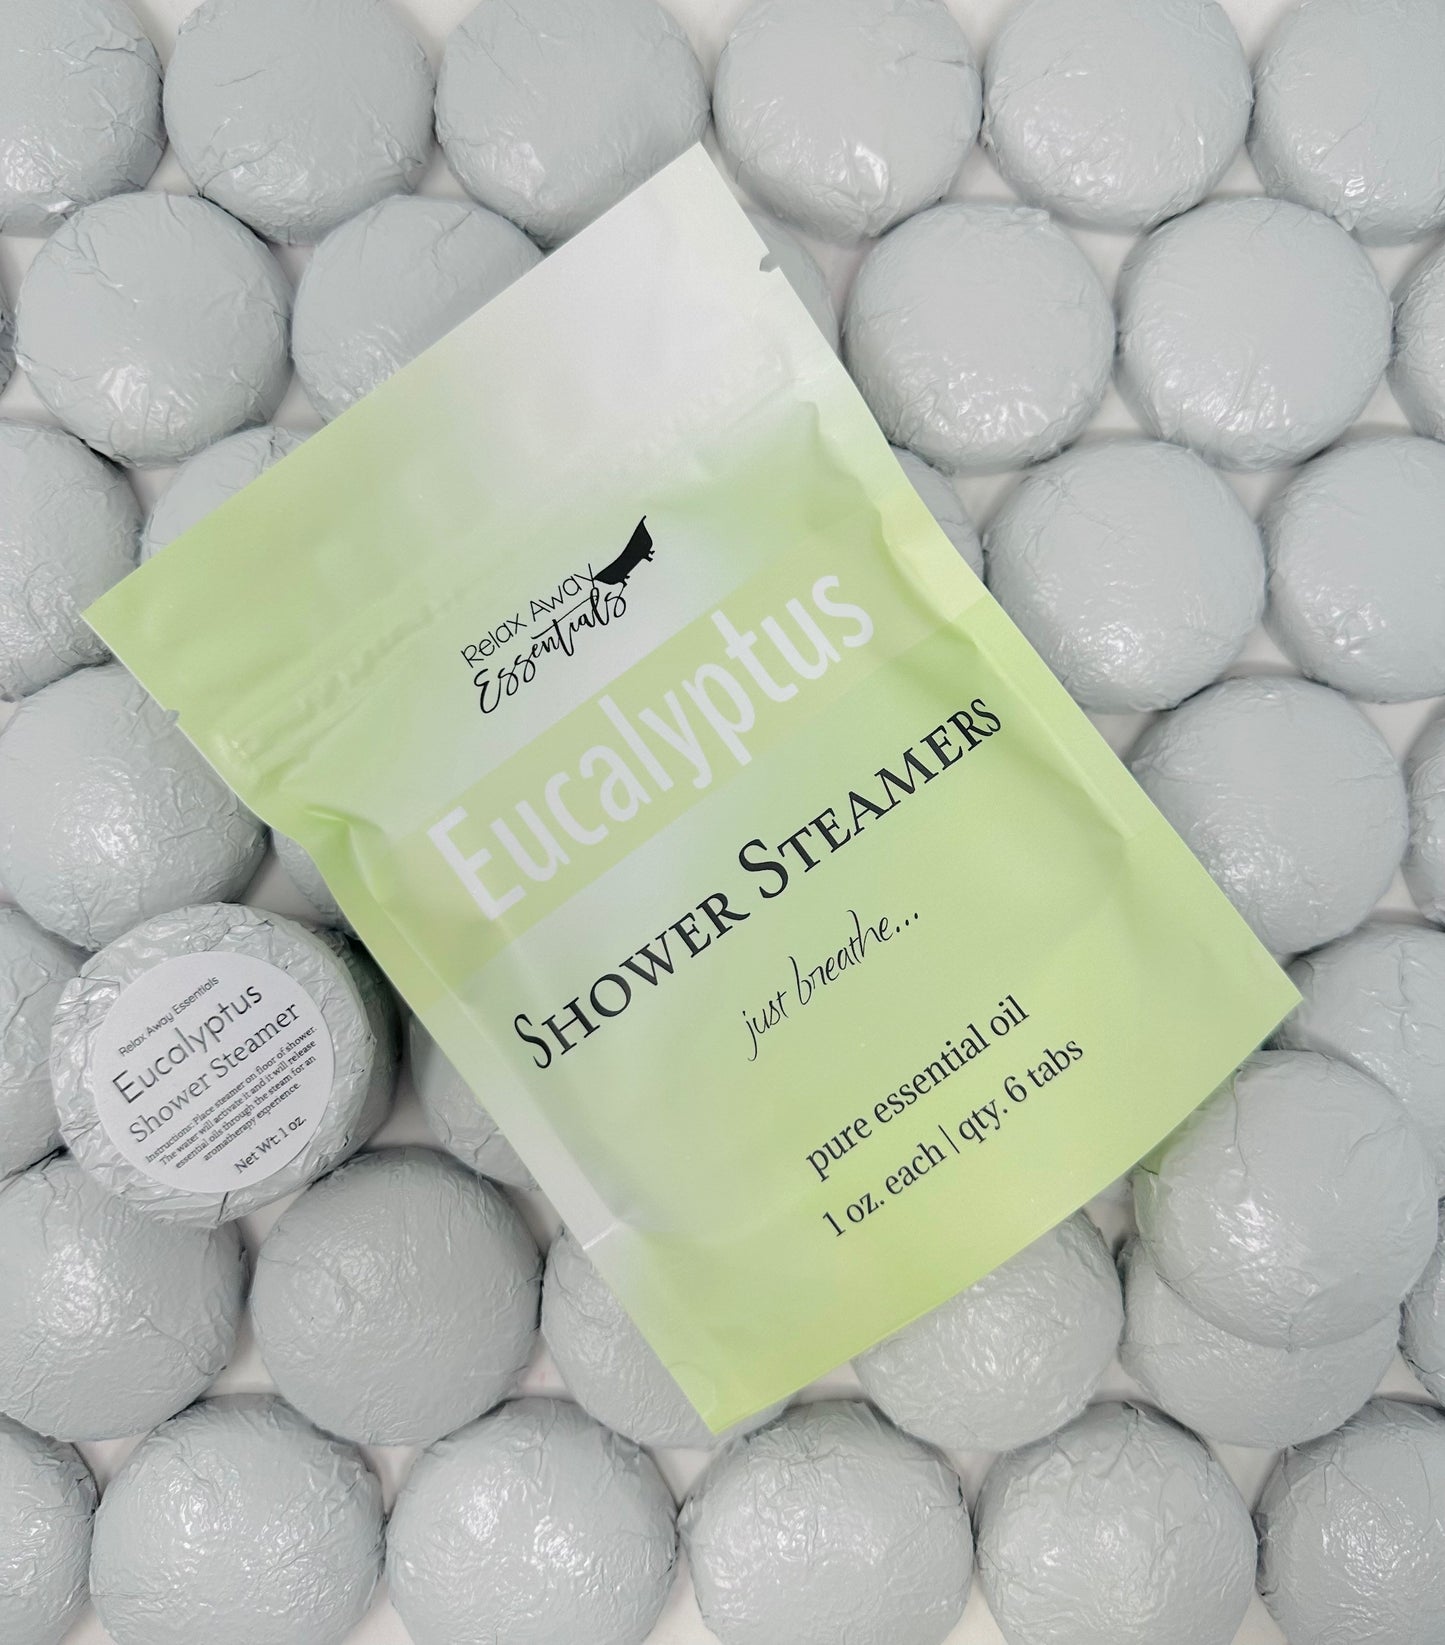 Eucalyptus Shower Steamers | 6 Pack | Individually Wrapped | Spa | Sinus Congestion | Relief| Essential Oils | Aromatherapy | handmade gift